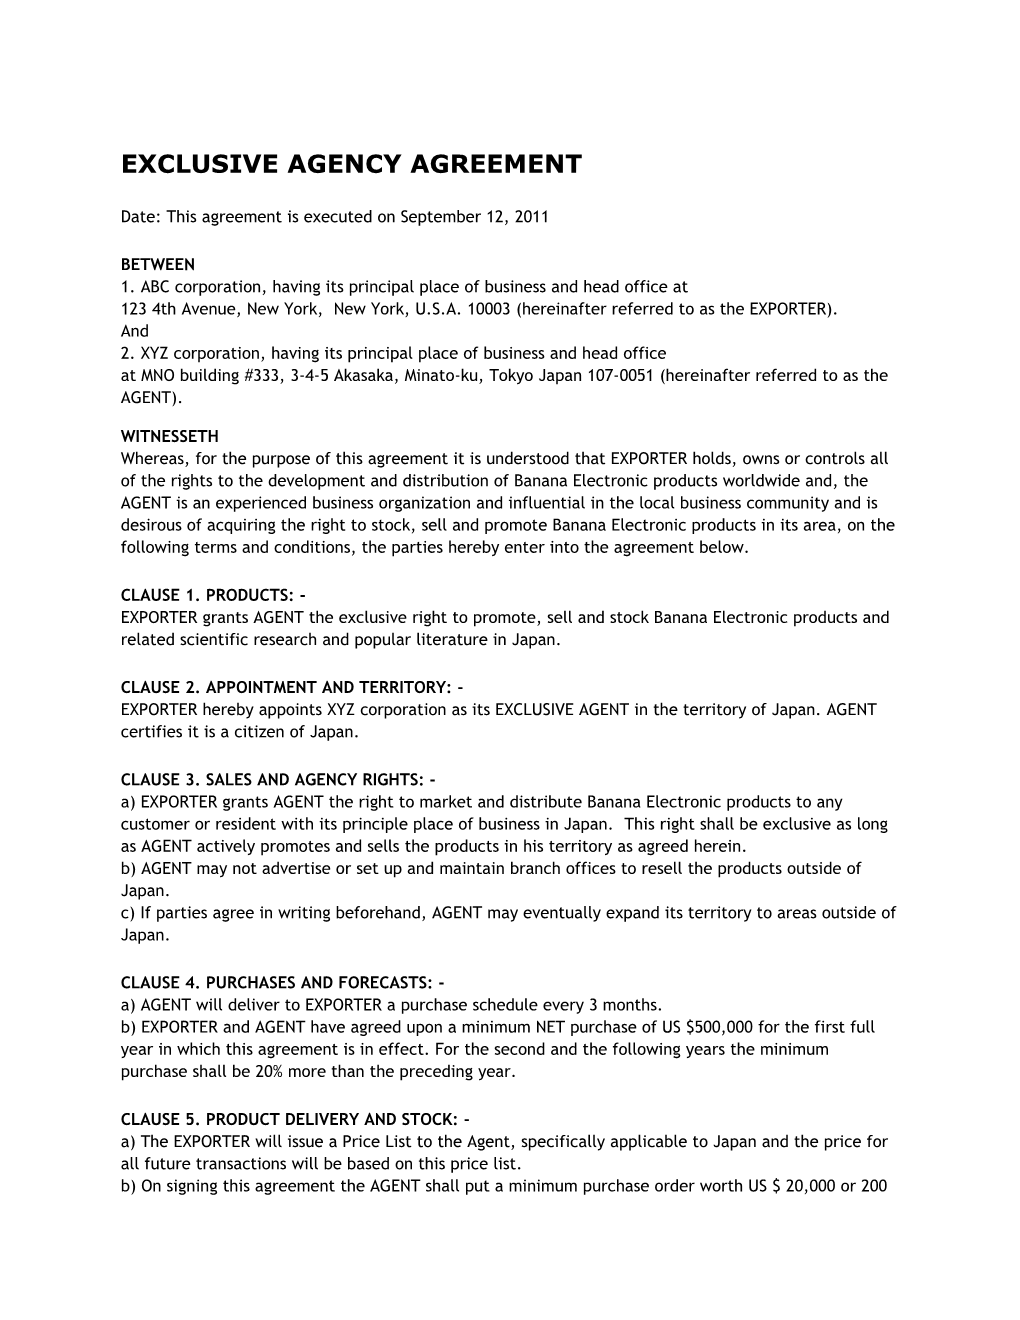 EXCLUSIVE AGENCY AGREEMENT Date: This Agreement Is Executed on September 12, 2011 BETWEEN